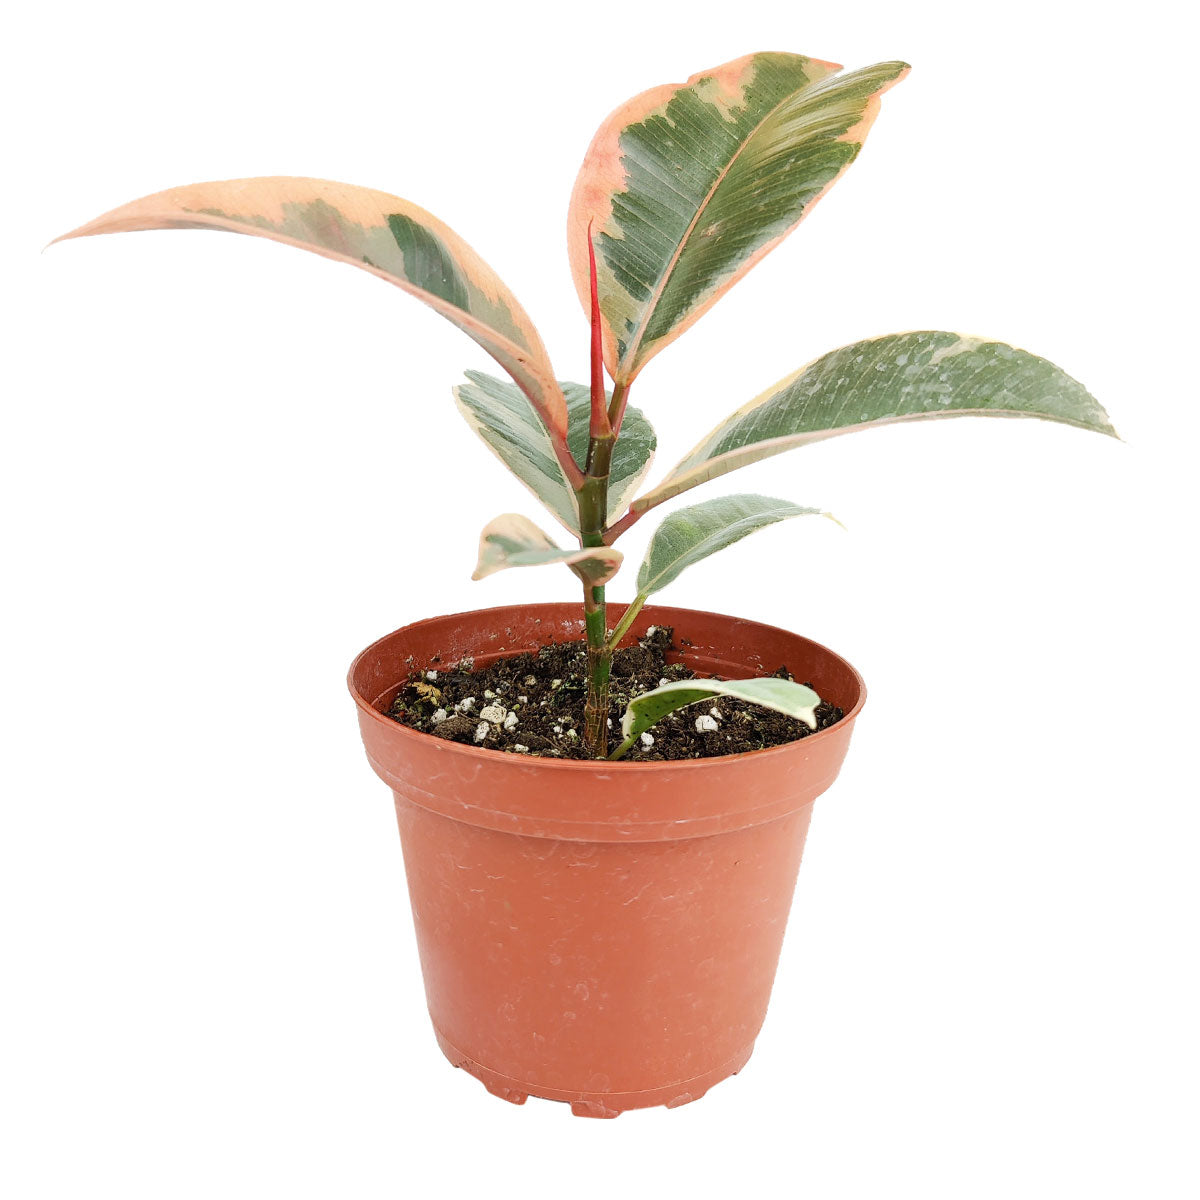 Ficus Elastica Ruby Pink Rubber Tree Delivery, Easy to care houseplant for beginner, Best Feng Shui Plants for your home office, how to care for ficus houseplant